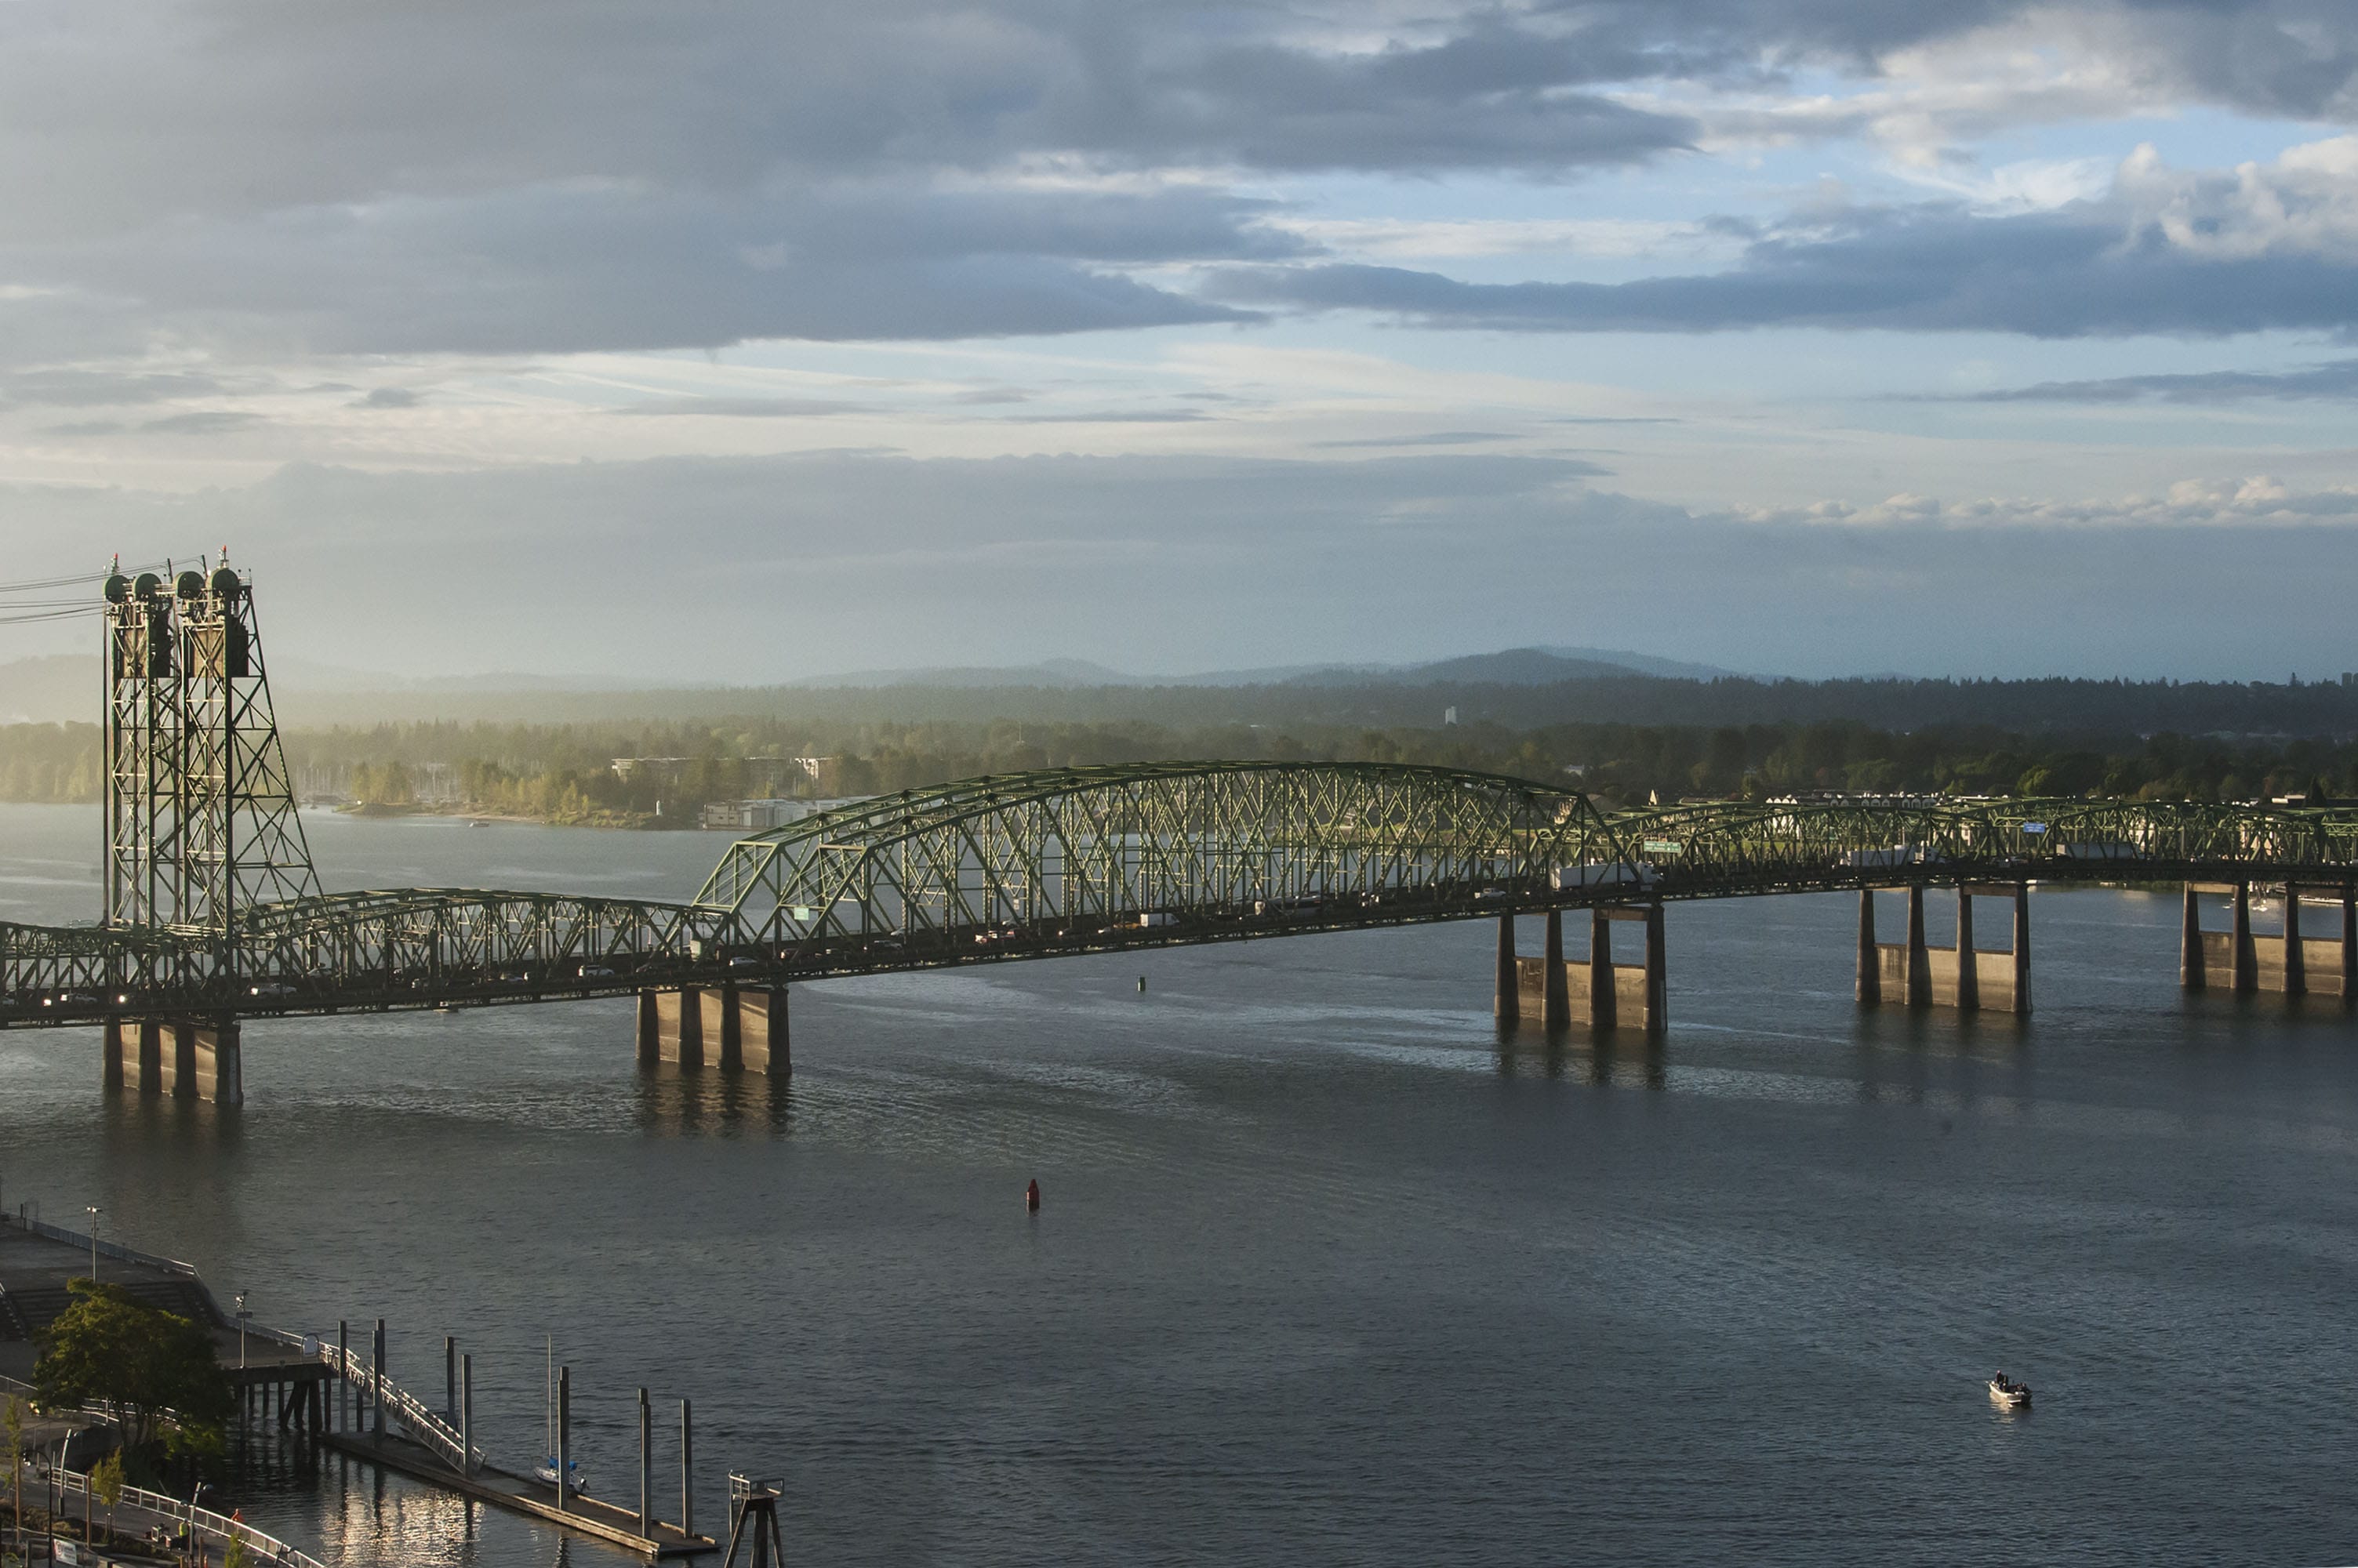 The I-5 Bridge stretches over the Columbia River during a sunrise in September.